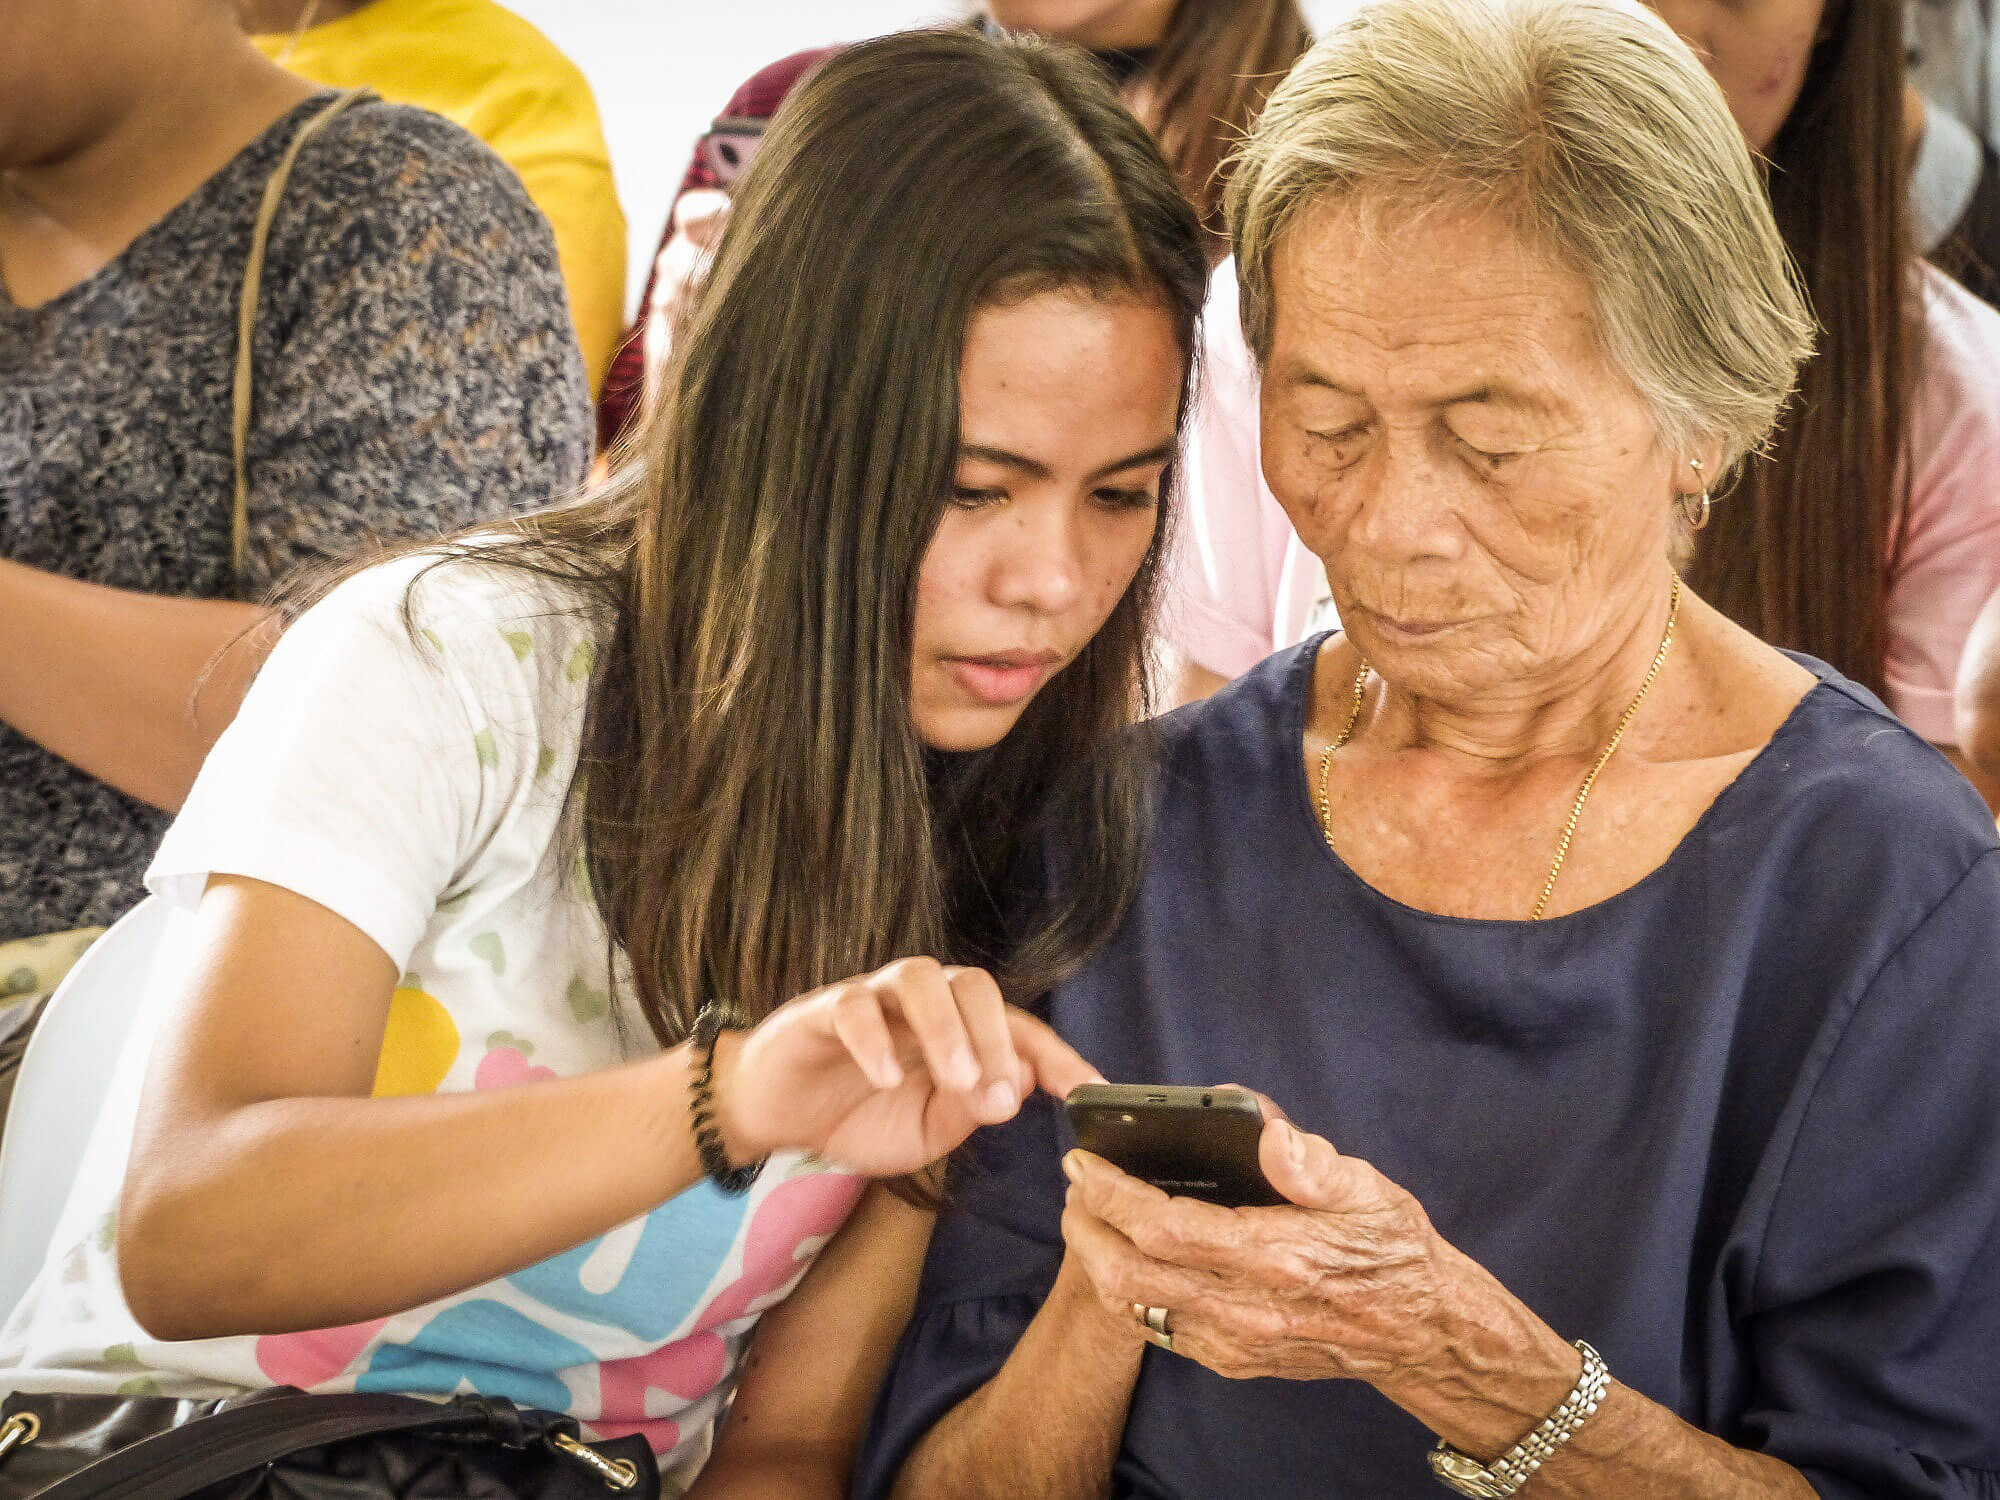 Nanay Miliang, 82, is one of the oldest participants in the Argao session. She and her fellow seniors learned more about smartphones, social media and internet safety during the session.